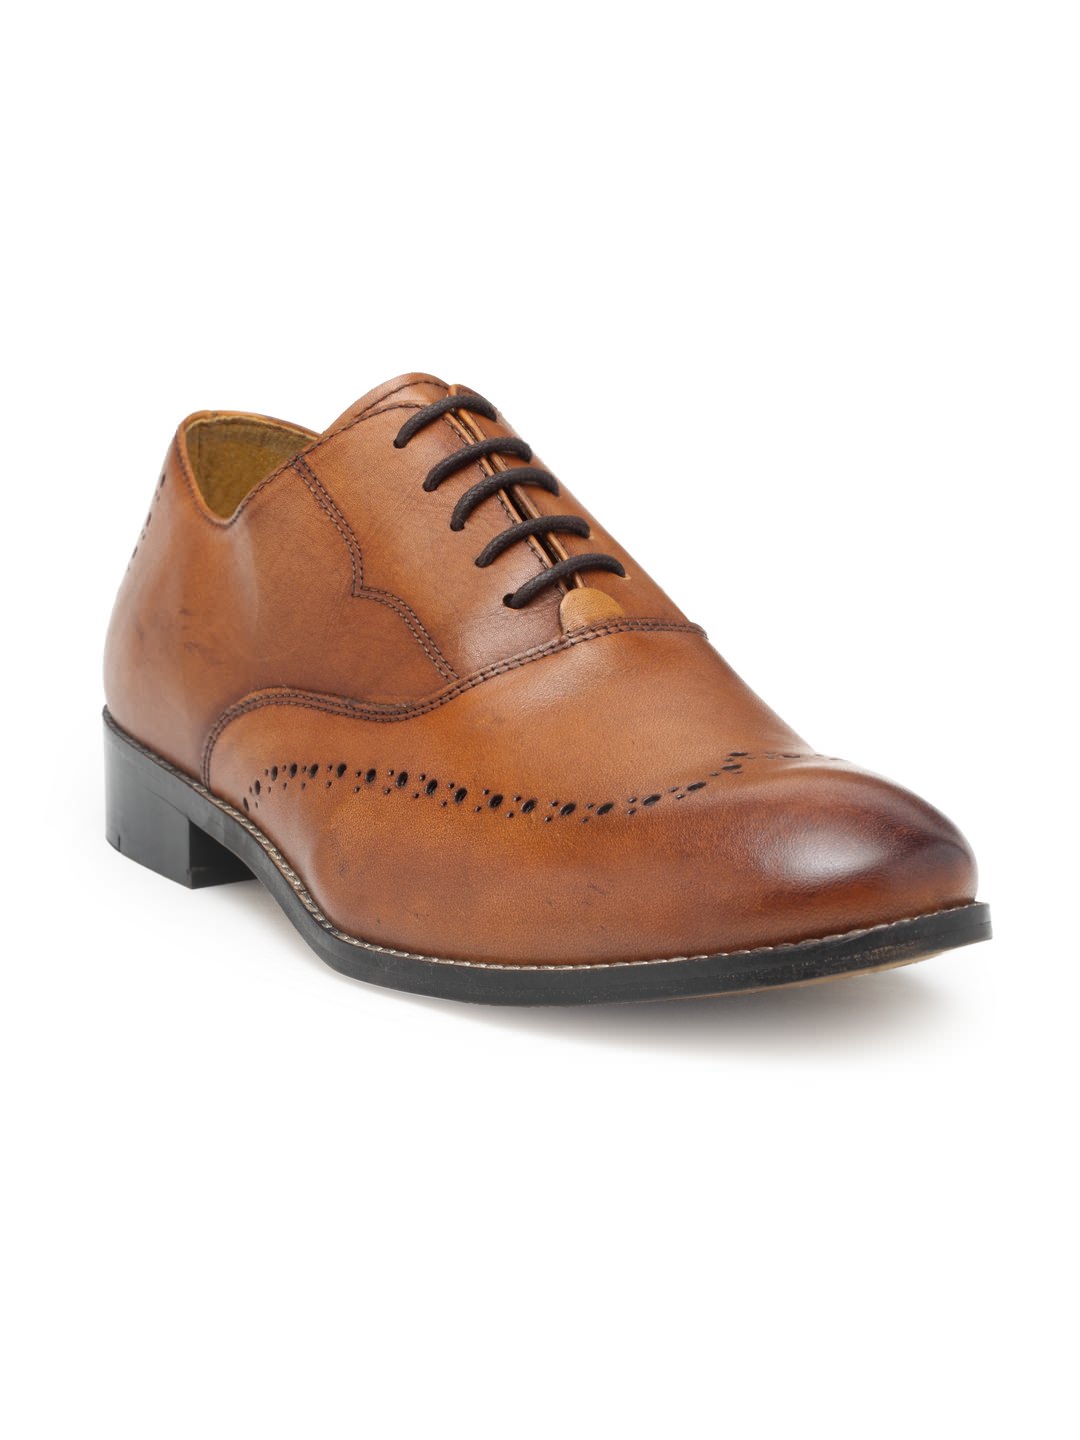 PREMIUM LEATHER TAN OXFORD SHOES WITH PERFORATED DETALING